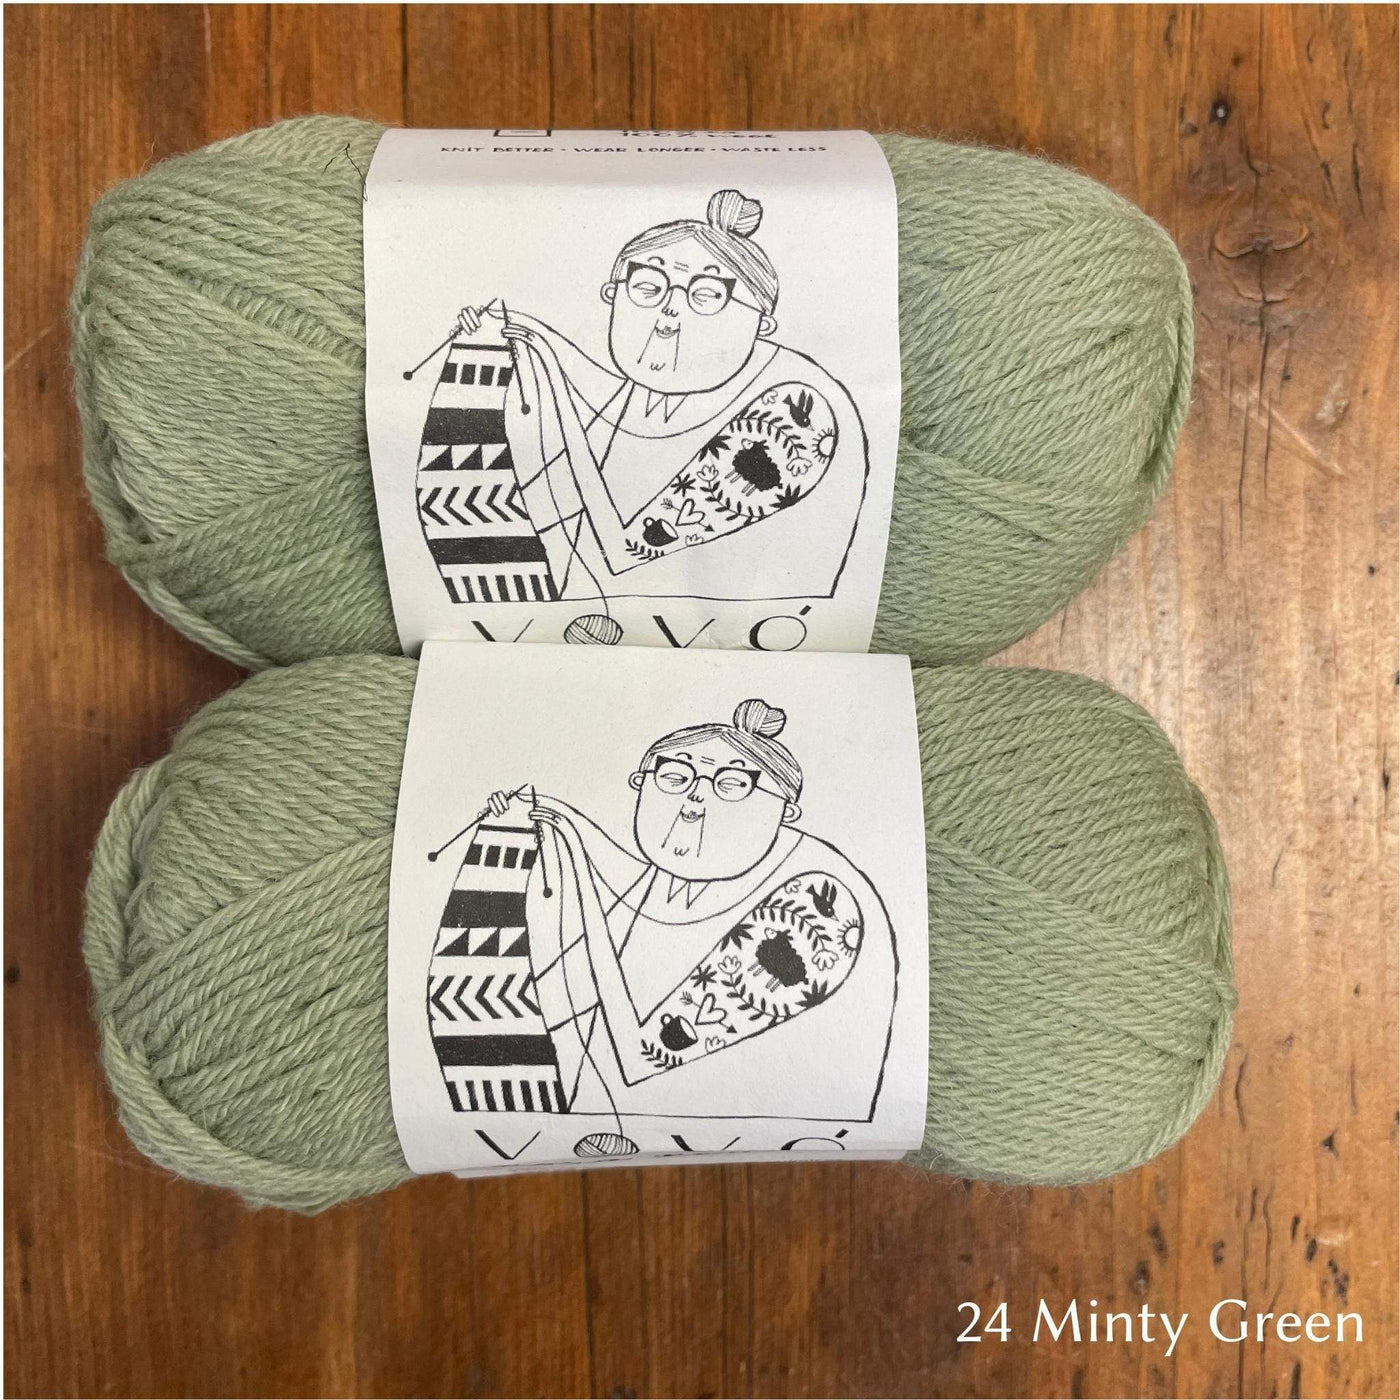 Retrosaria Vovo variant color 24 Minty Green, a light mint green, showing label with grandmother knitting